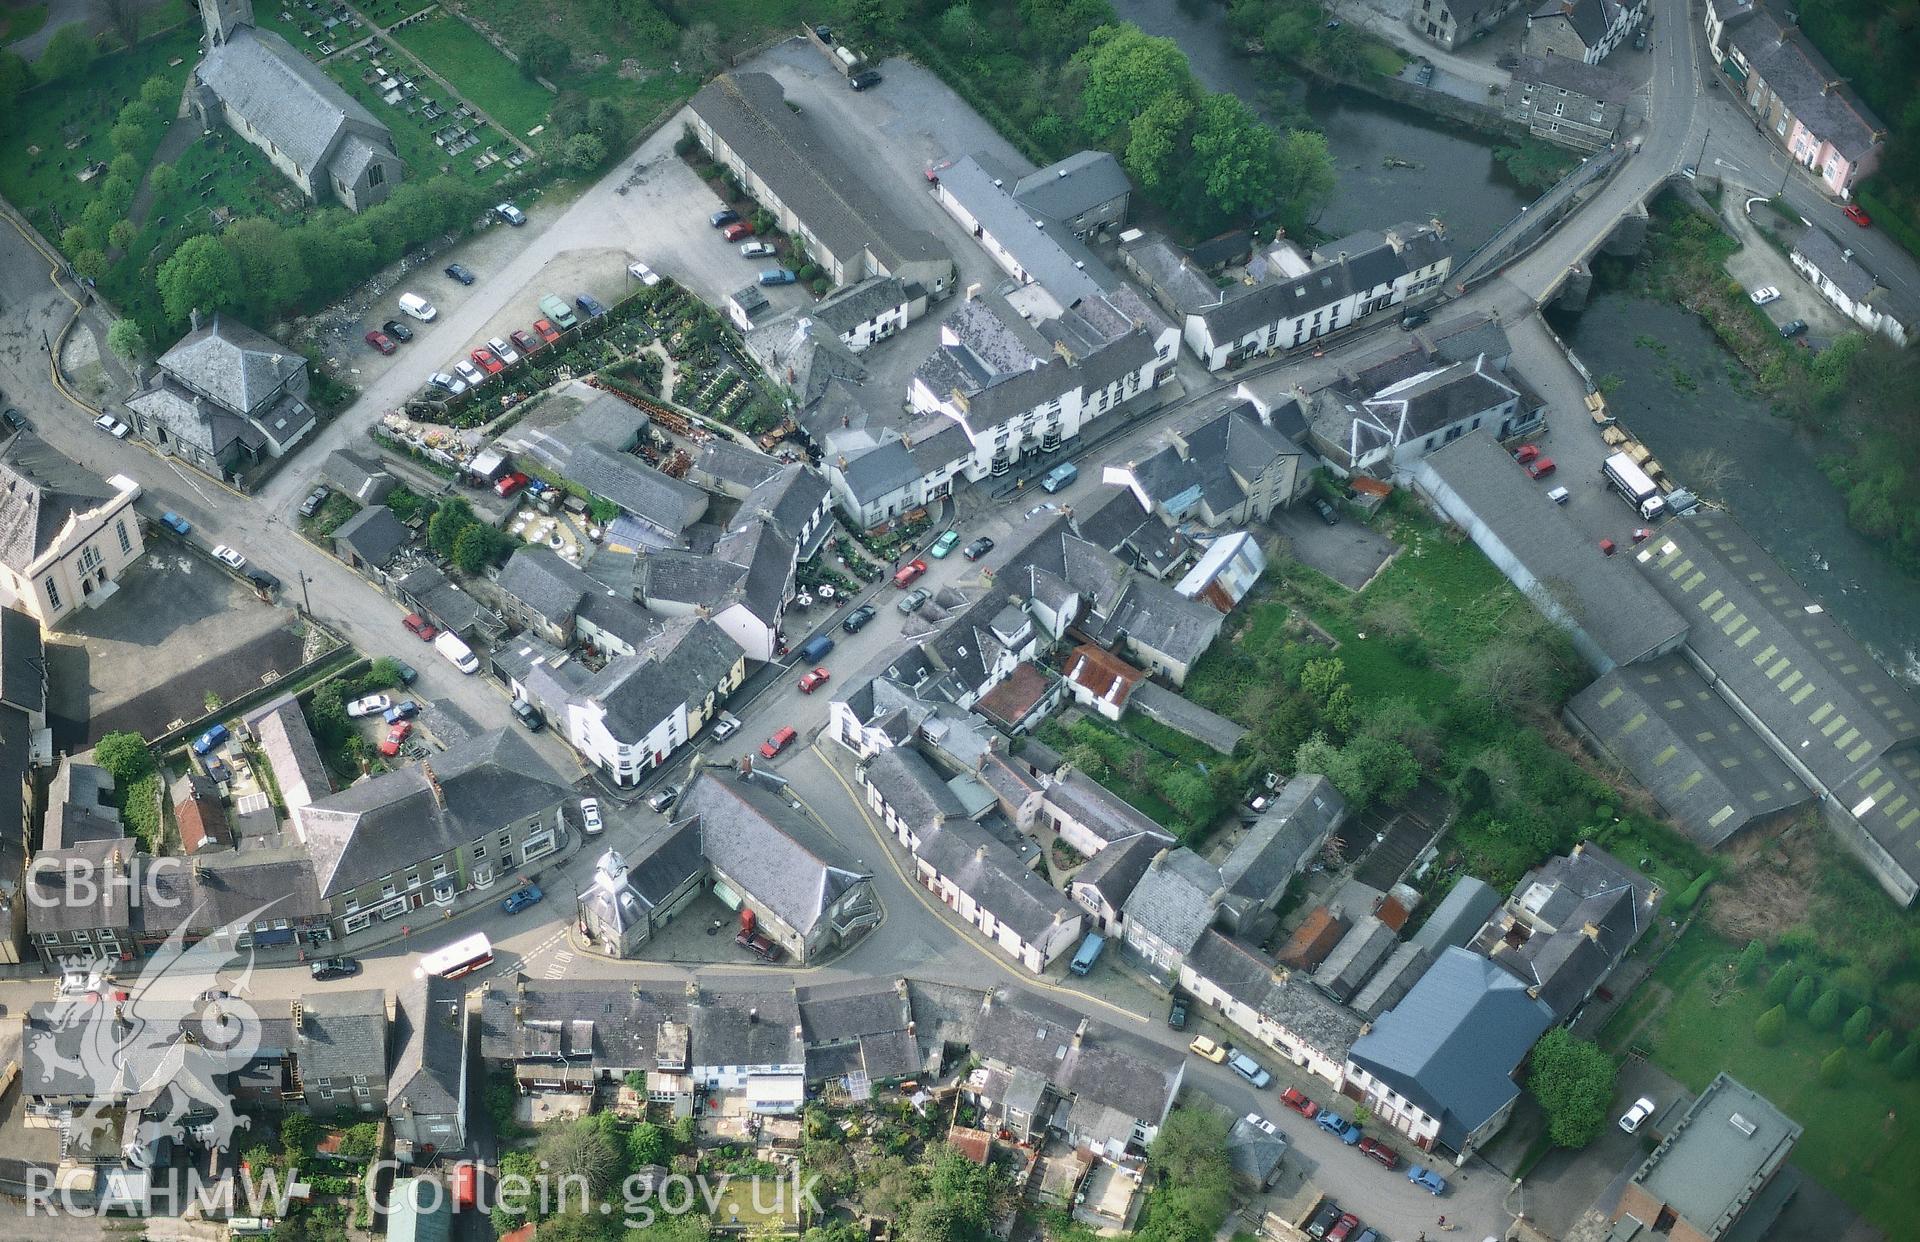 Slide of RCAHMW colour oblique aerial photograph of Newcastle Emlyn, taken by C.R. Musson, 27/4/1999.